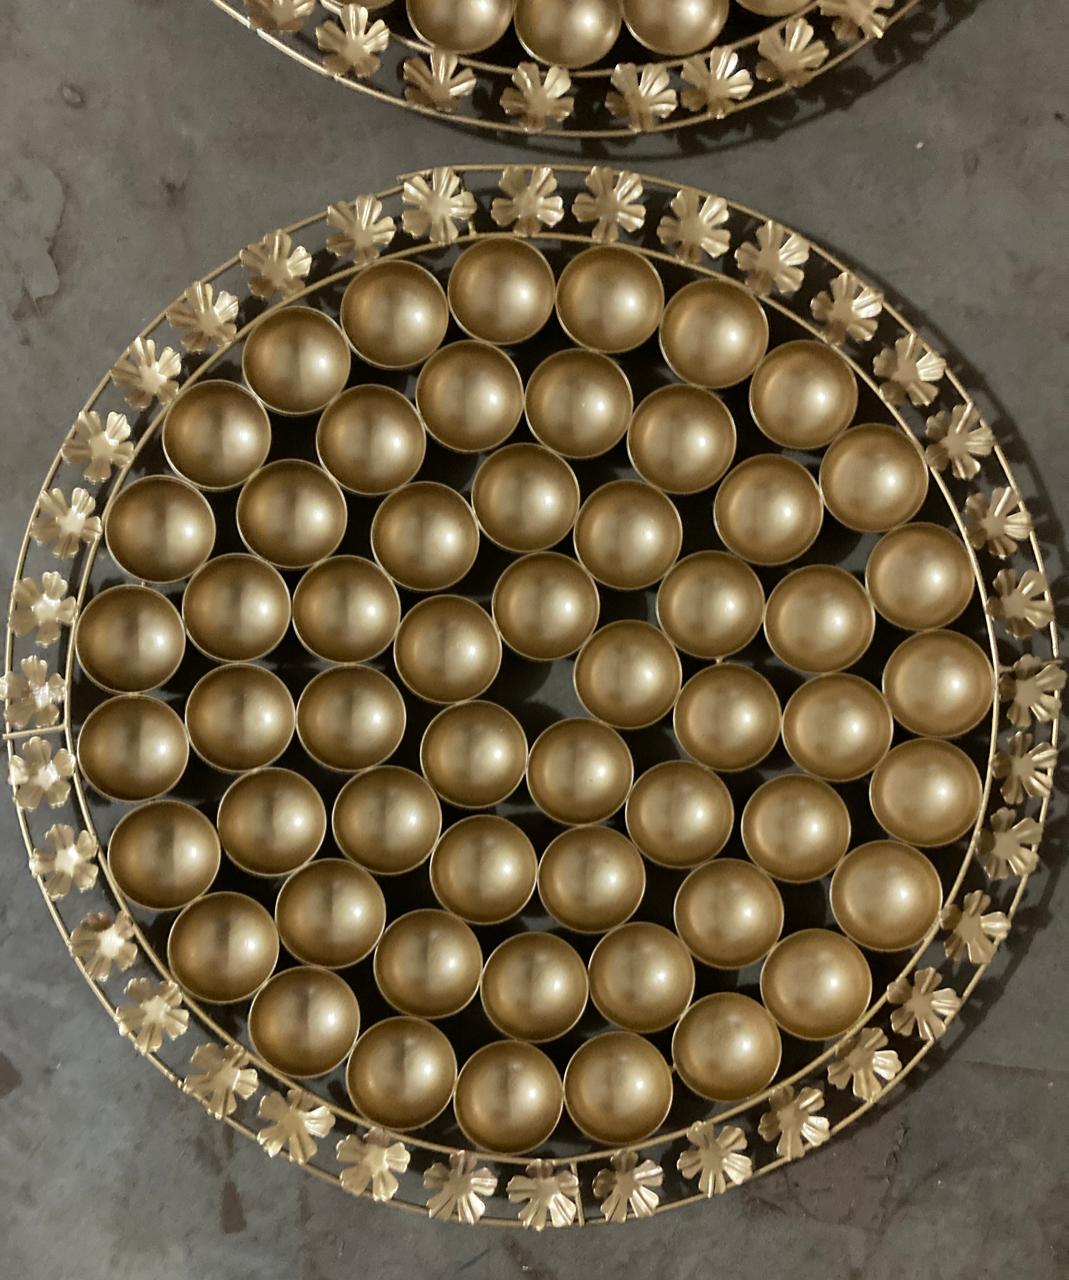 56 bhog thaali Chappan( Can also be used as urli for decoration)